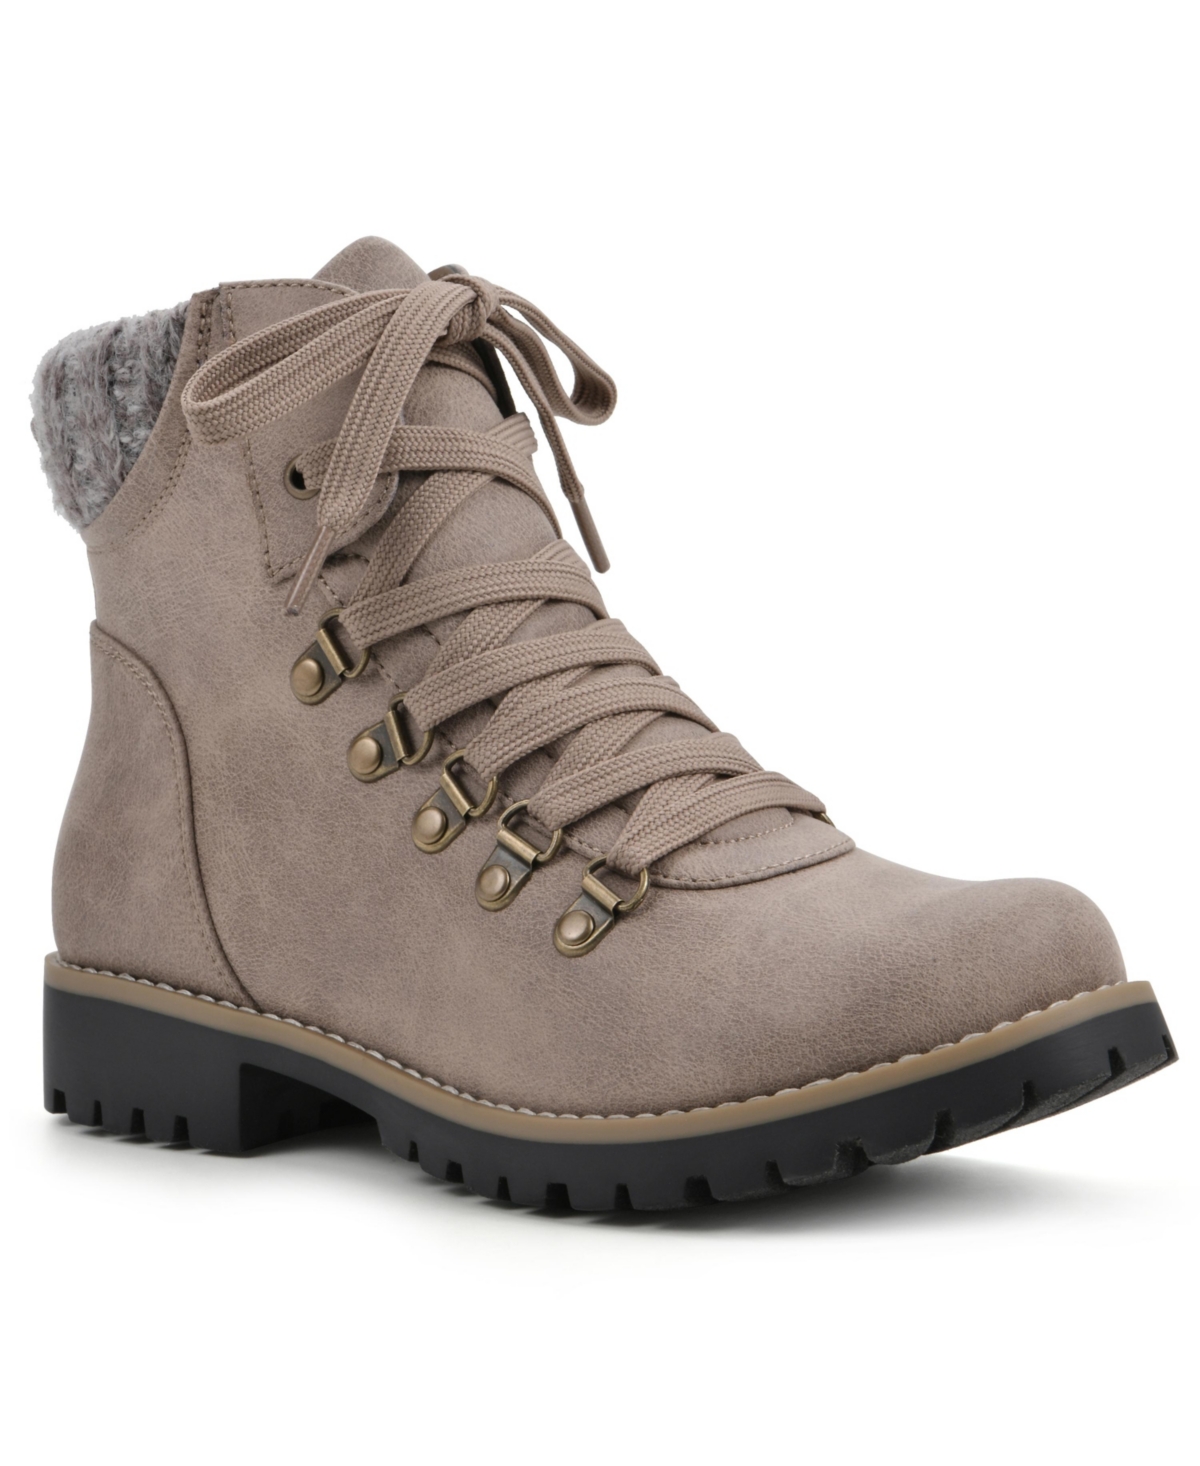 Women's Primed Lace-up Boot - Taupe, Fabric